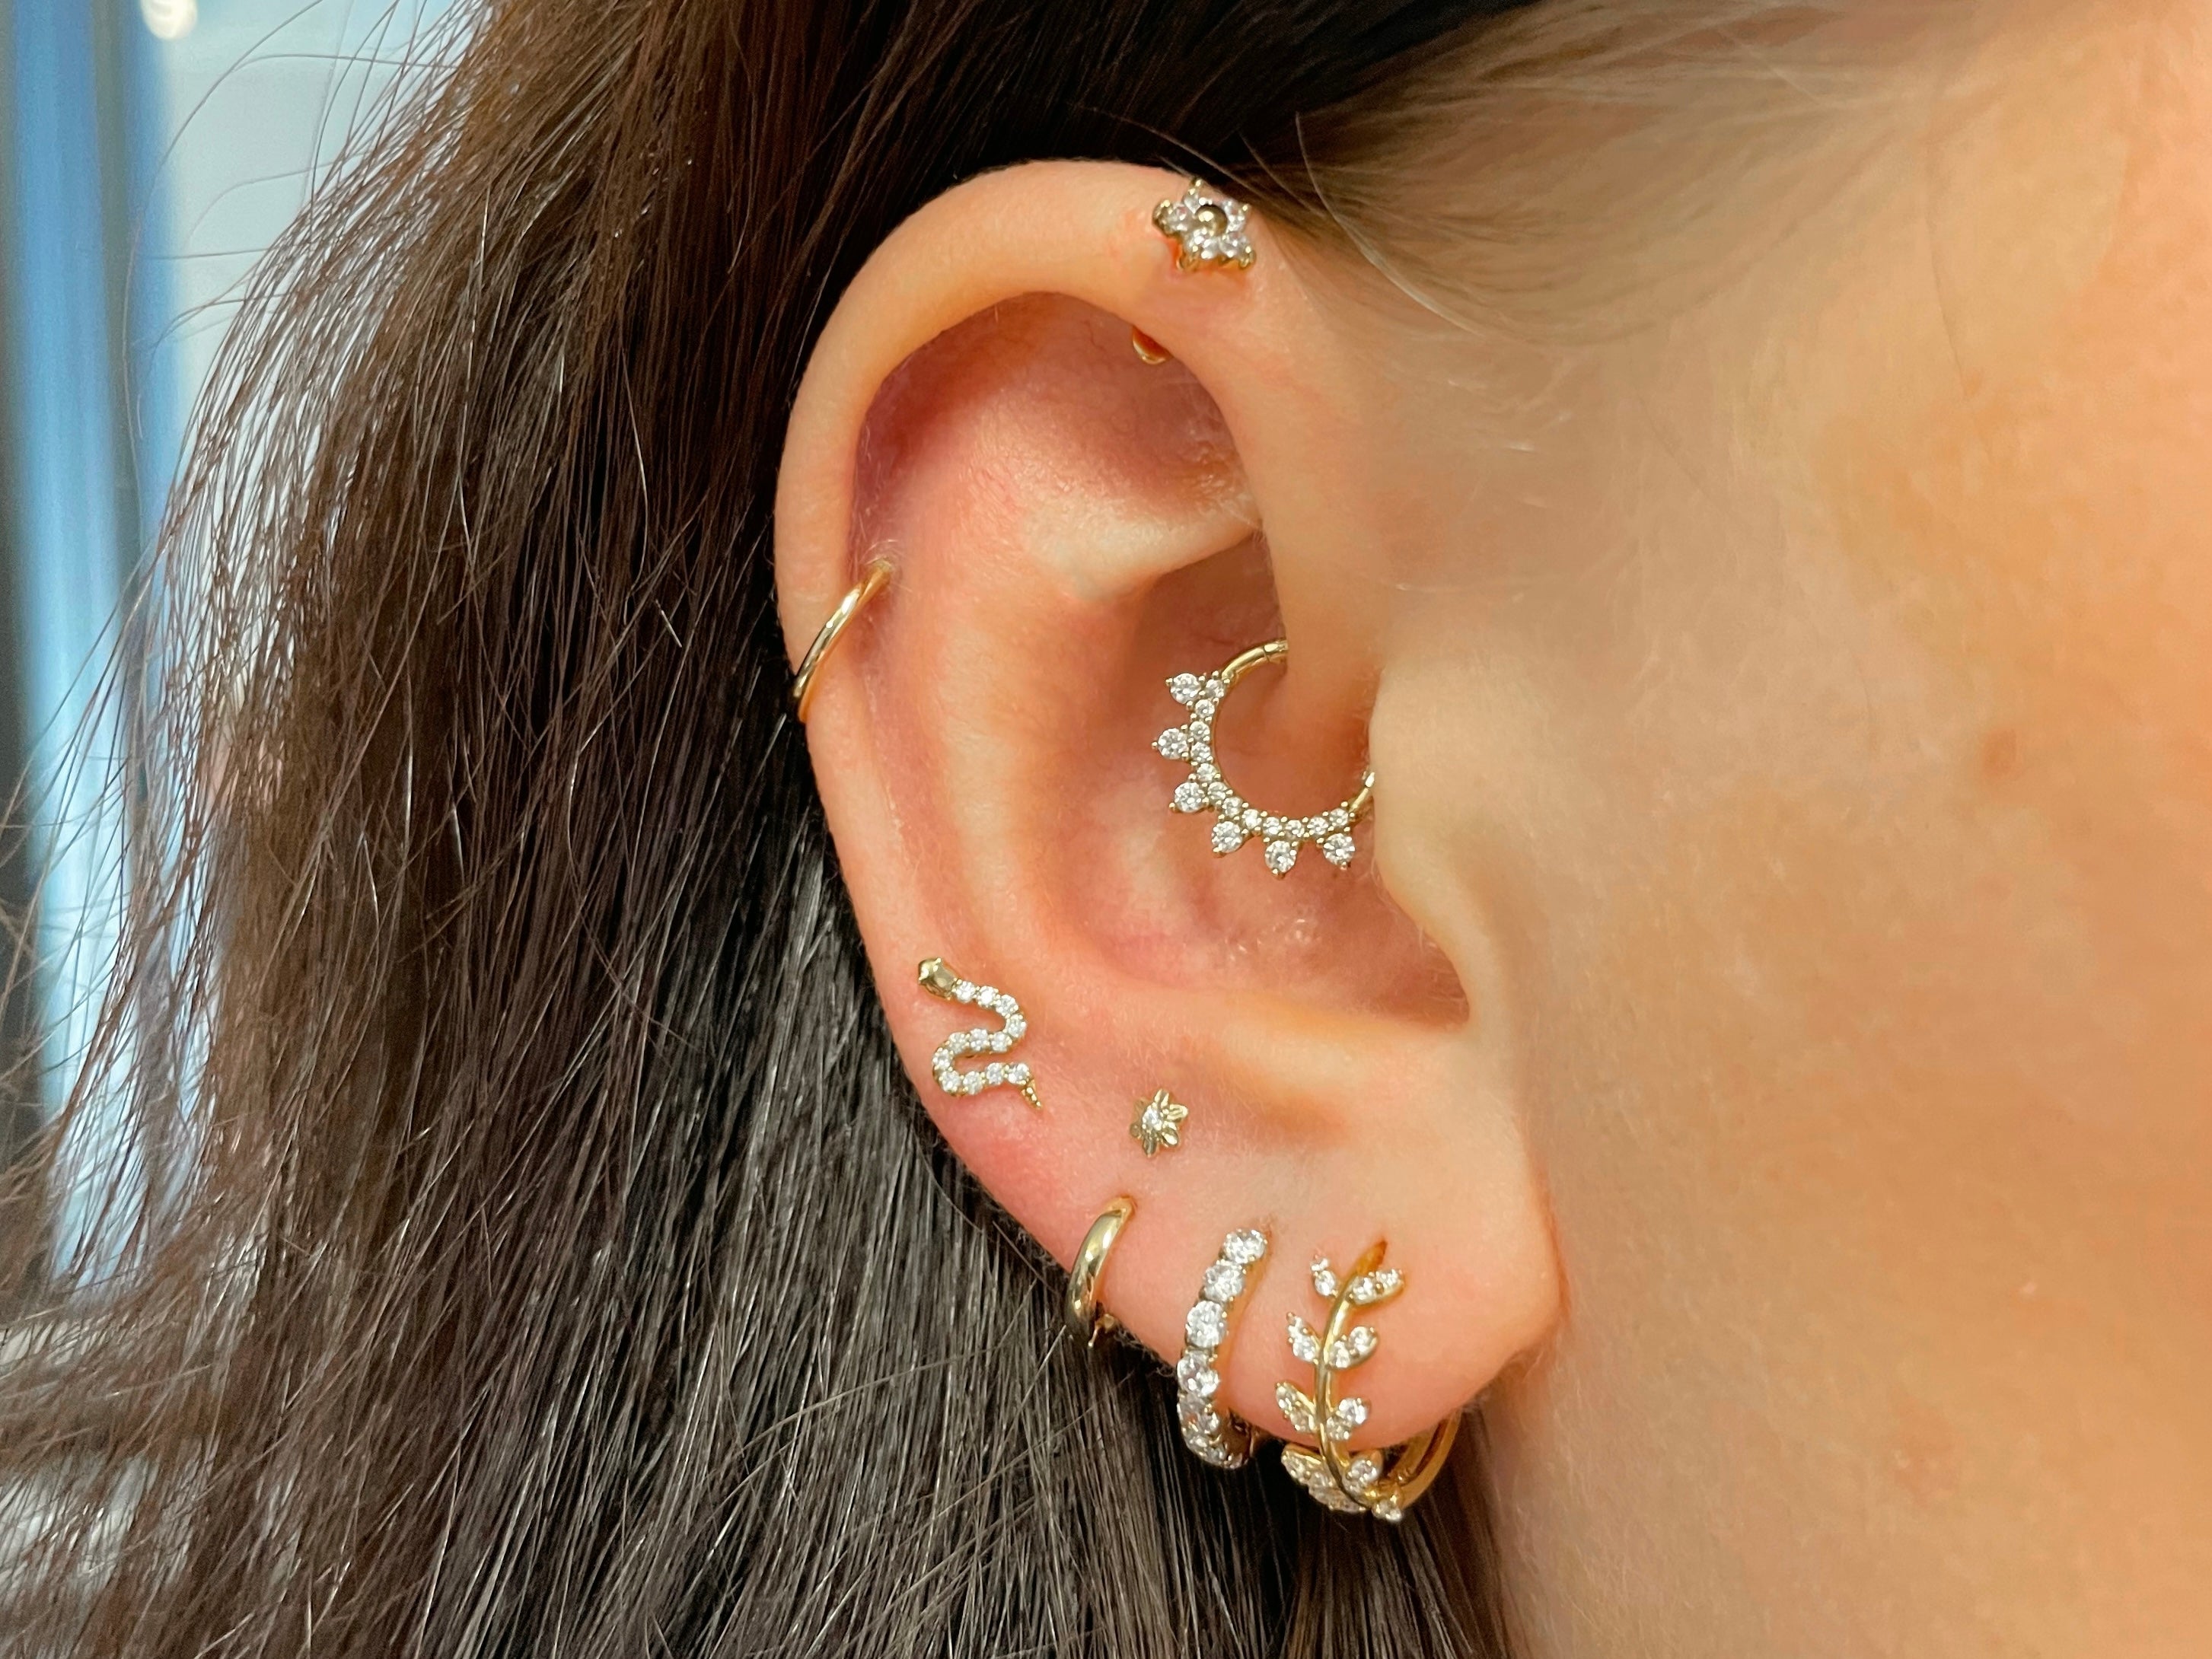 The Curated Ear - Piercing Experience